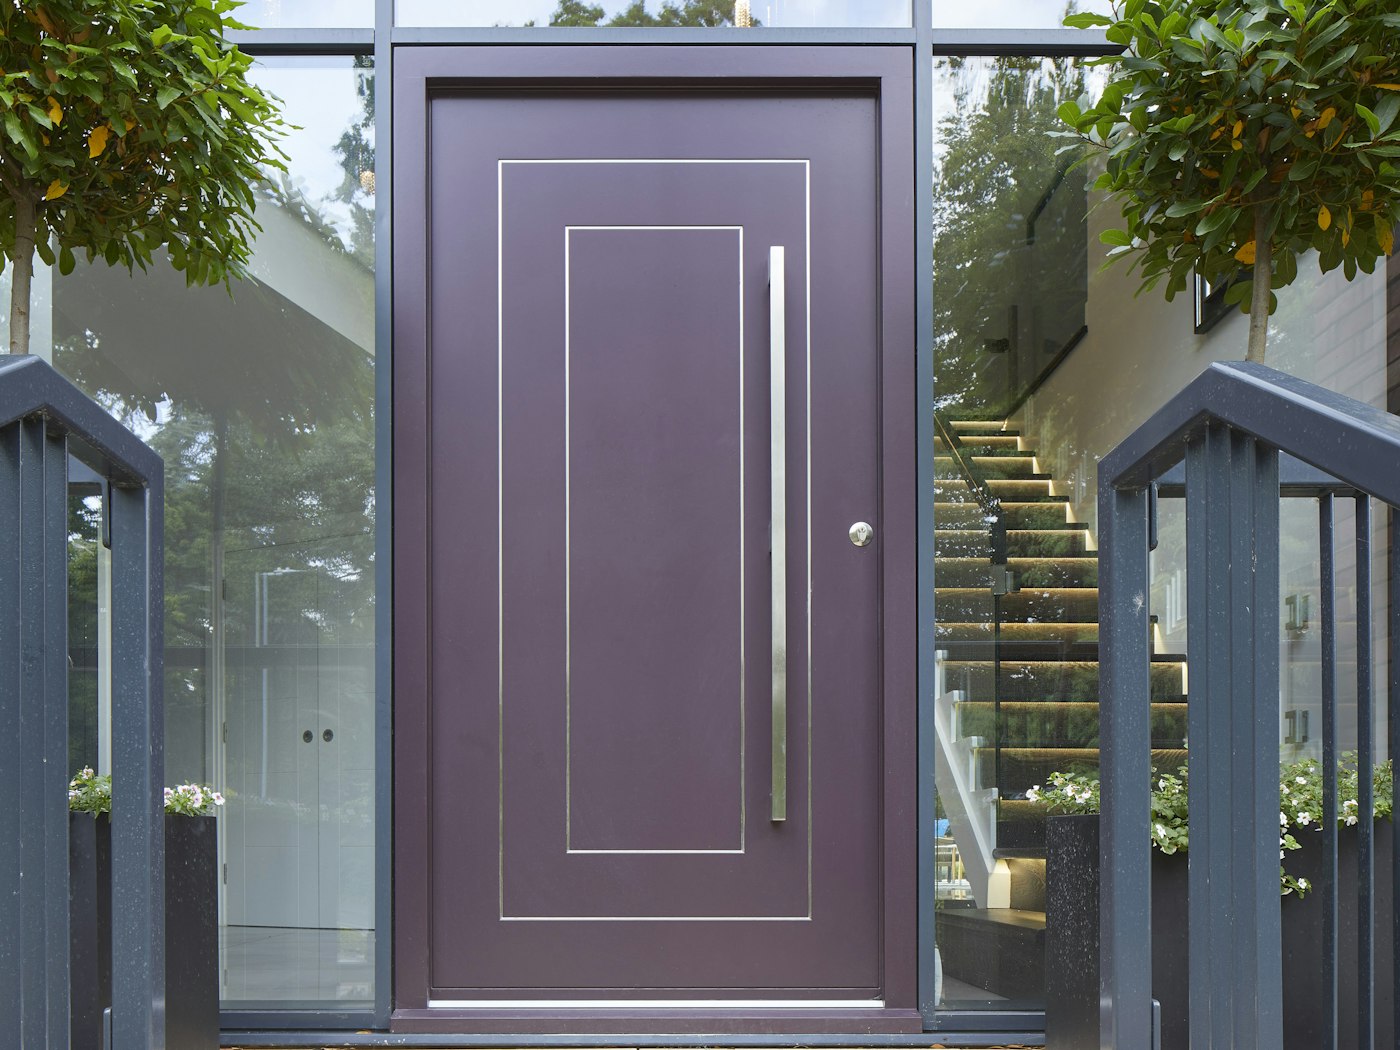 This Form purple front door features stainless steel strips in rectangular or square design and these elevate the contemporary styling